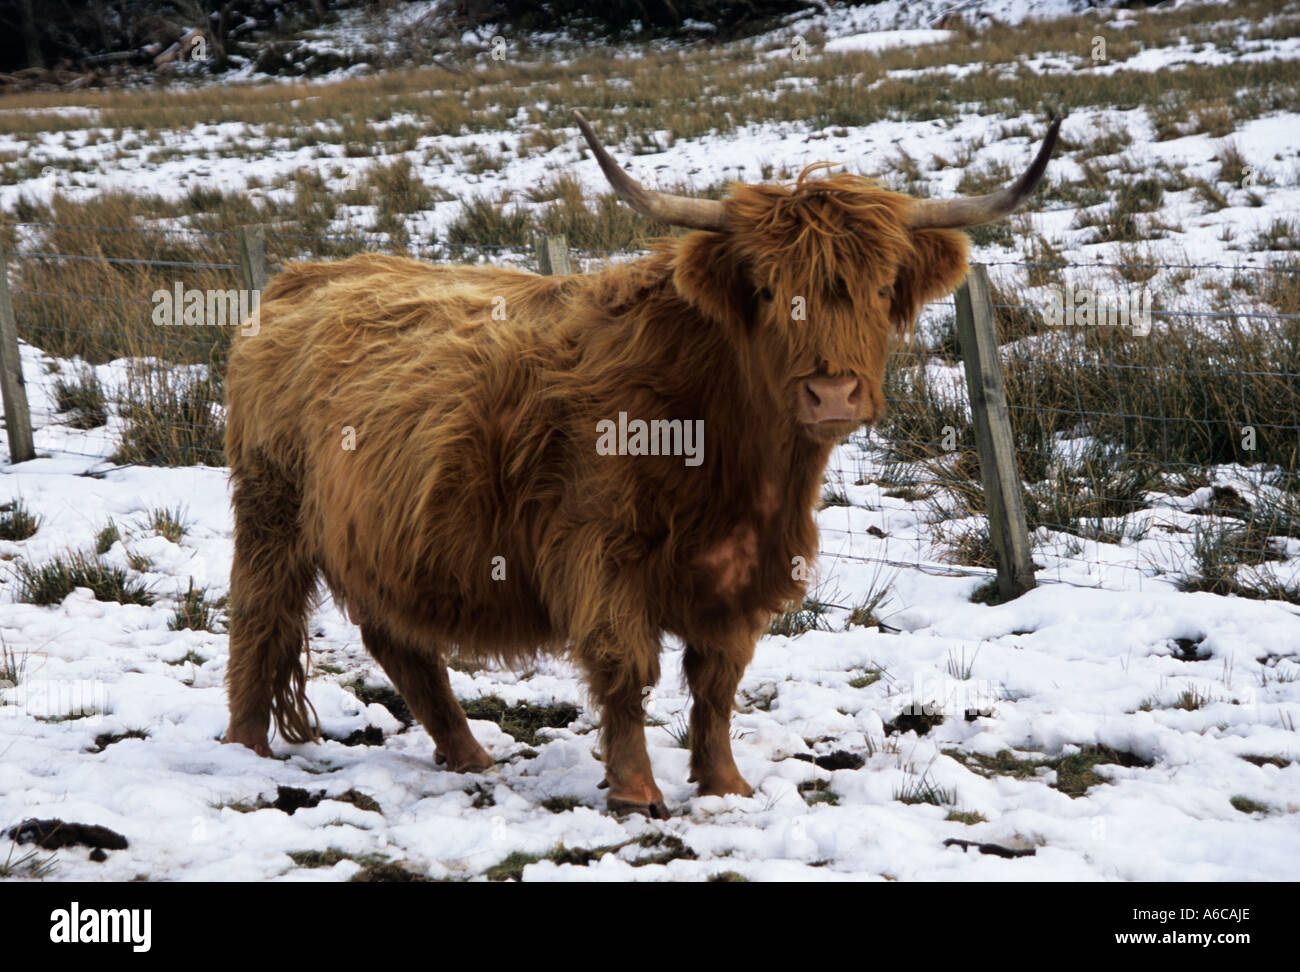 SCOTTISH HIGHLANDS UK February A curious Highland cow in a snow covered field Stock Photo